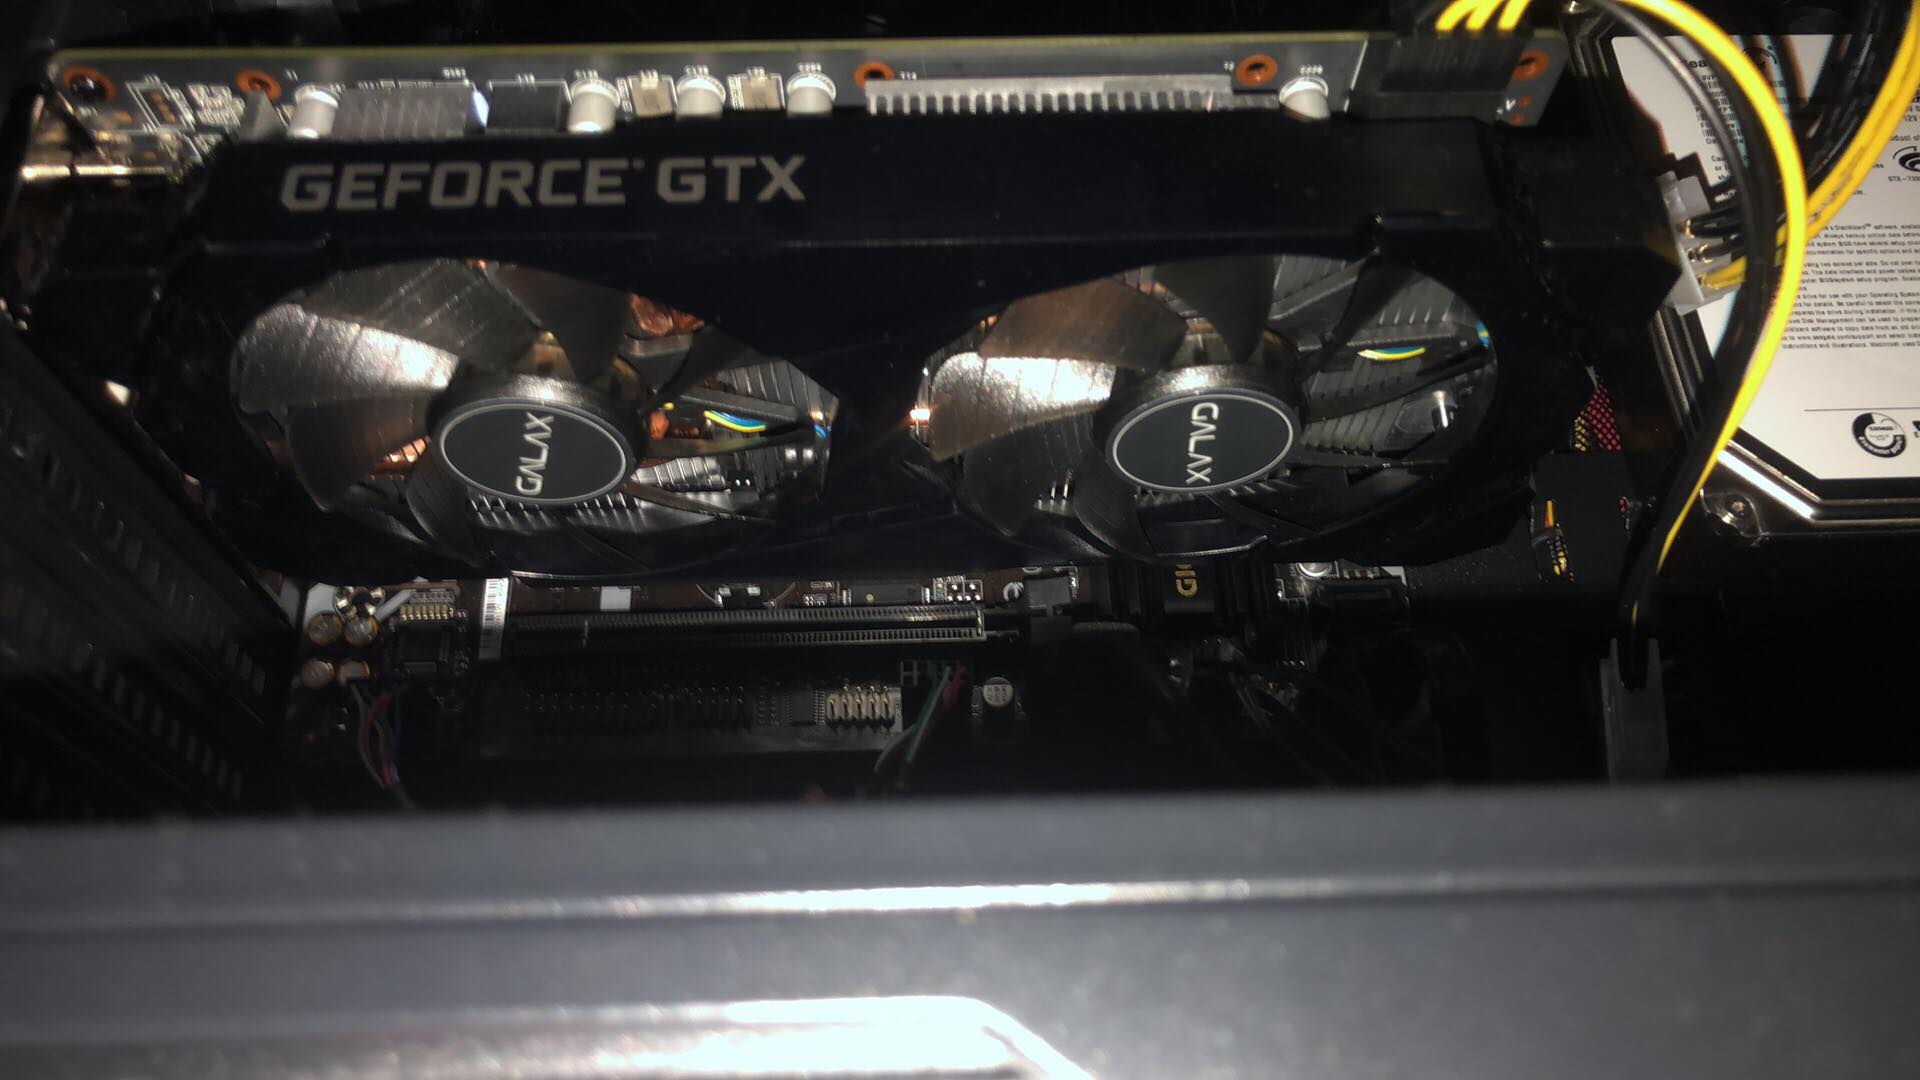 Images of unboxed Nvidia GeForce GTX 